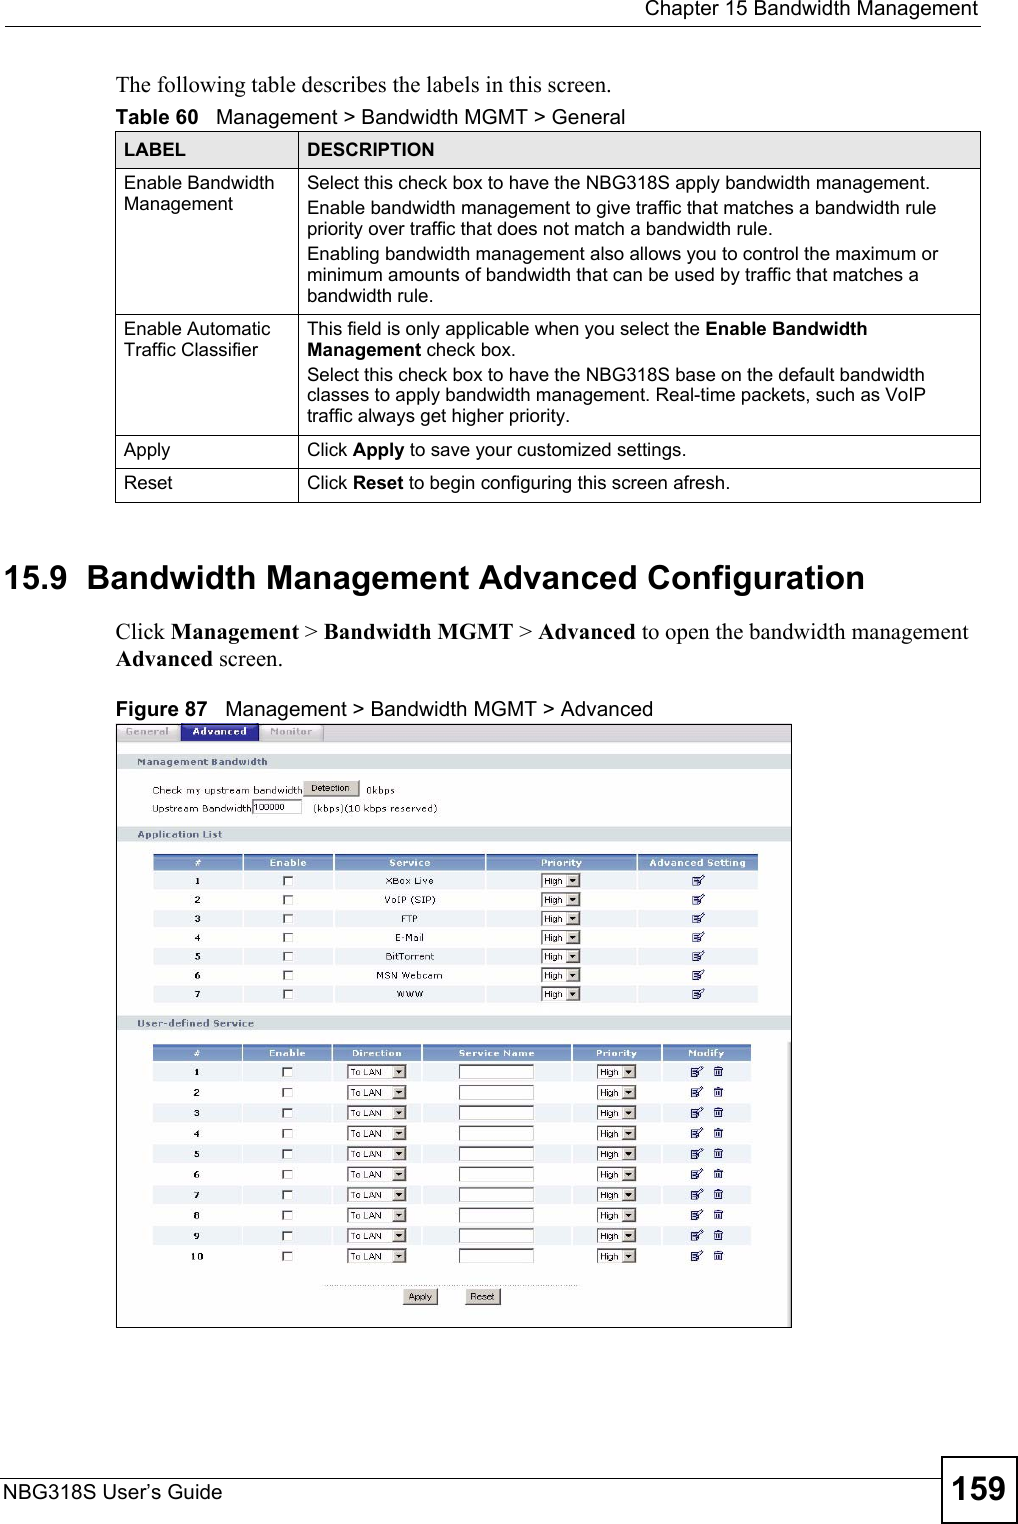  Chapter 15 Bandwidth ManagementNBG318S User’s Guide 159The following table describes the labels in this screen.15.9  Bandwidth Management Advanced Configuration Click Management &gt; Bandwidth MGMT &gt; Advanced to open the bandwidth management Advanced screen.Figure 87   Management &gt; Bandwidth MGMT &gt; Advanced Table 60   Management &gt; Bandwidth MGMT &gt; GeneralLABEL DESCRIPTIONEnable Bandwidth Management Select this check box to have the NBG318S apply bandwidth management. Enable bandwidth management to give traffic that matches a bandwidth rule priority over traffic that does not match a bandwidth rule. Enabling bandwidth management also allows you to control the maximum or minimum amounts of bandwidth that can be used by traffic that matches a bandwidth rule. Enable Automatic Traffic Classifier This field is only applicable when you select the Enable Bandwidth Management check box.Select this check box to have the NBG318S base on the default bandwidth classes to apply bandwidth management. Real-time packets, such as VoIP traffic always get higher priority.Apply Click Apply to save your customized settings.Reset Click Reset to begin configuring this screen afresh.